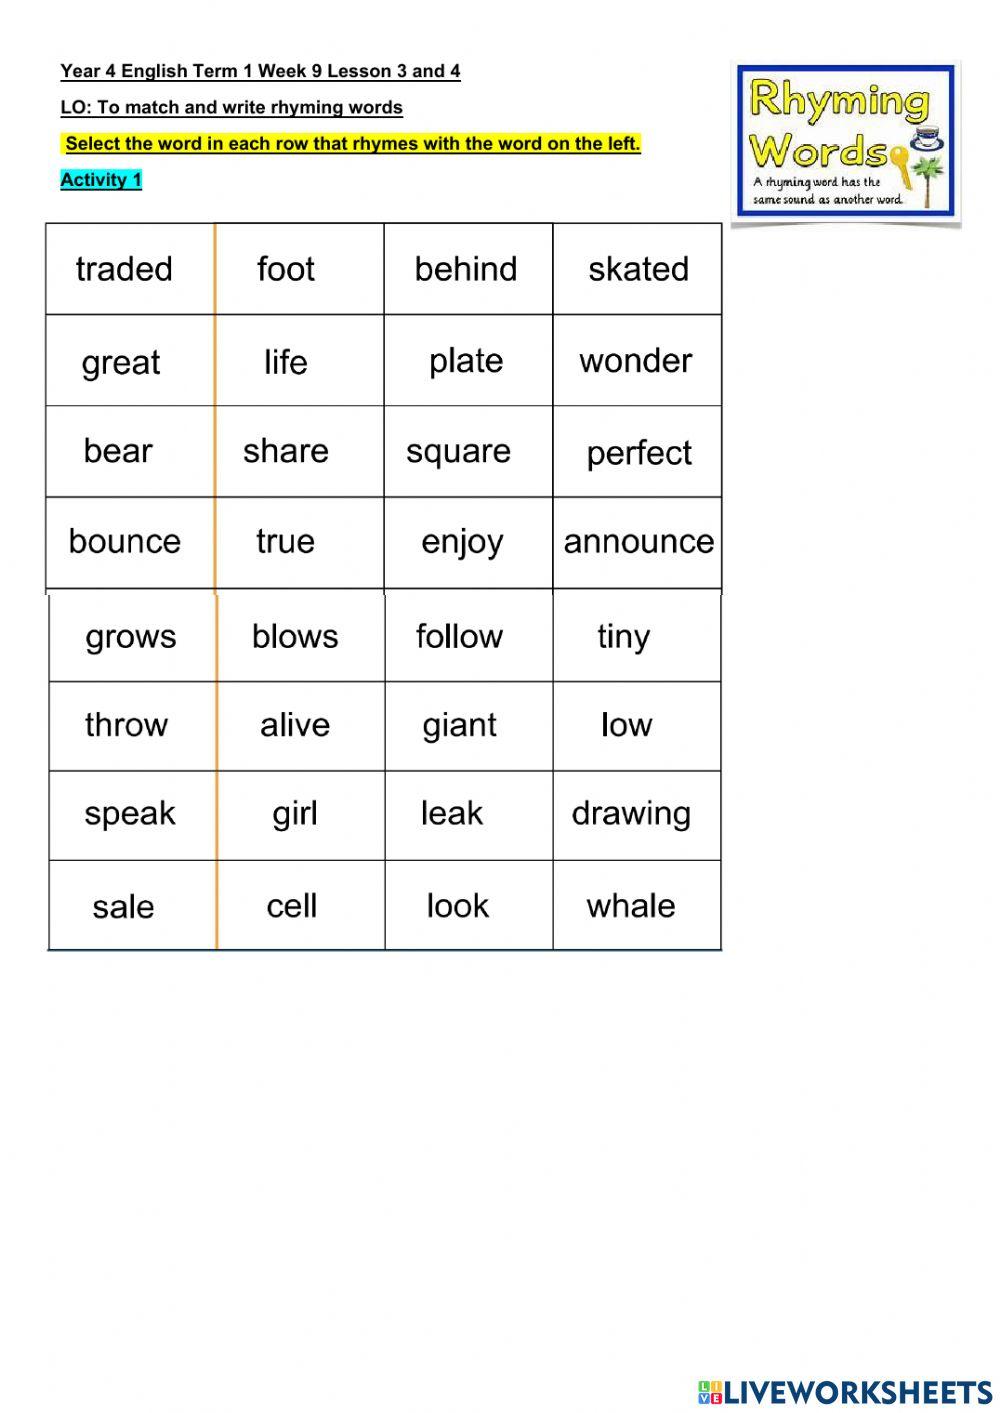 DIS English Term 1 Week 9 Lesson 3 and 4 Classwork